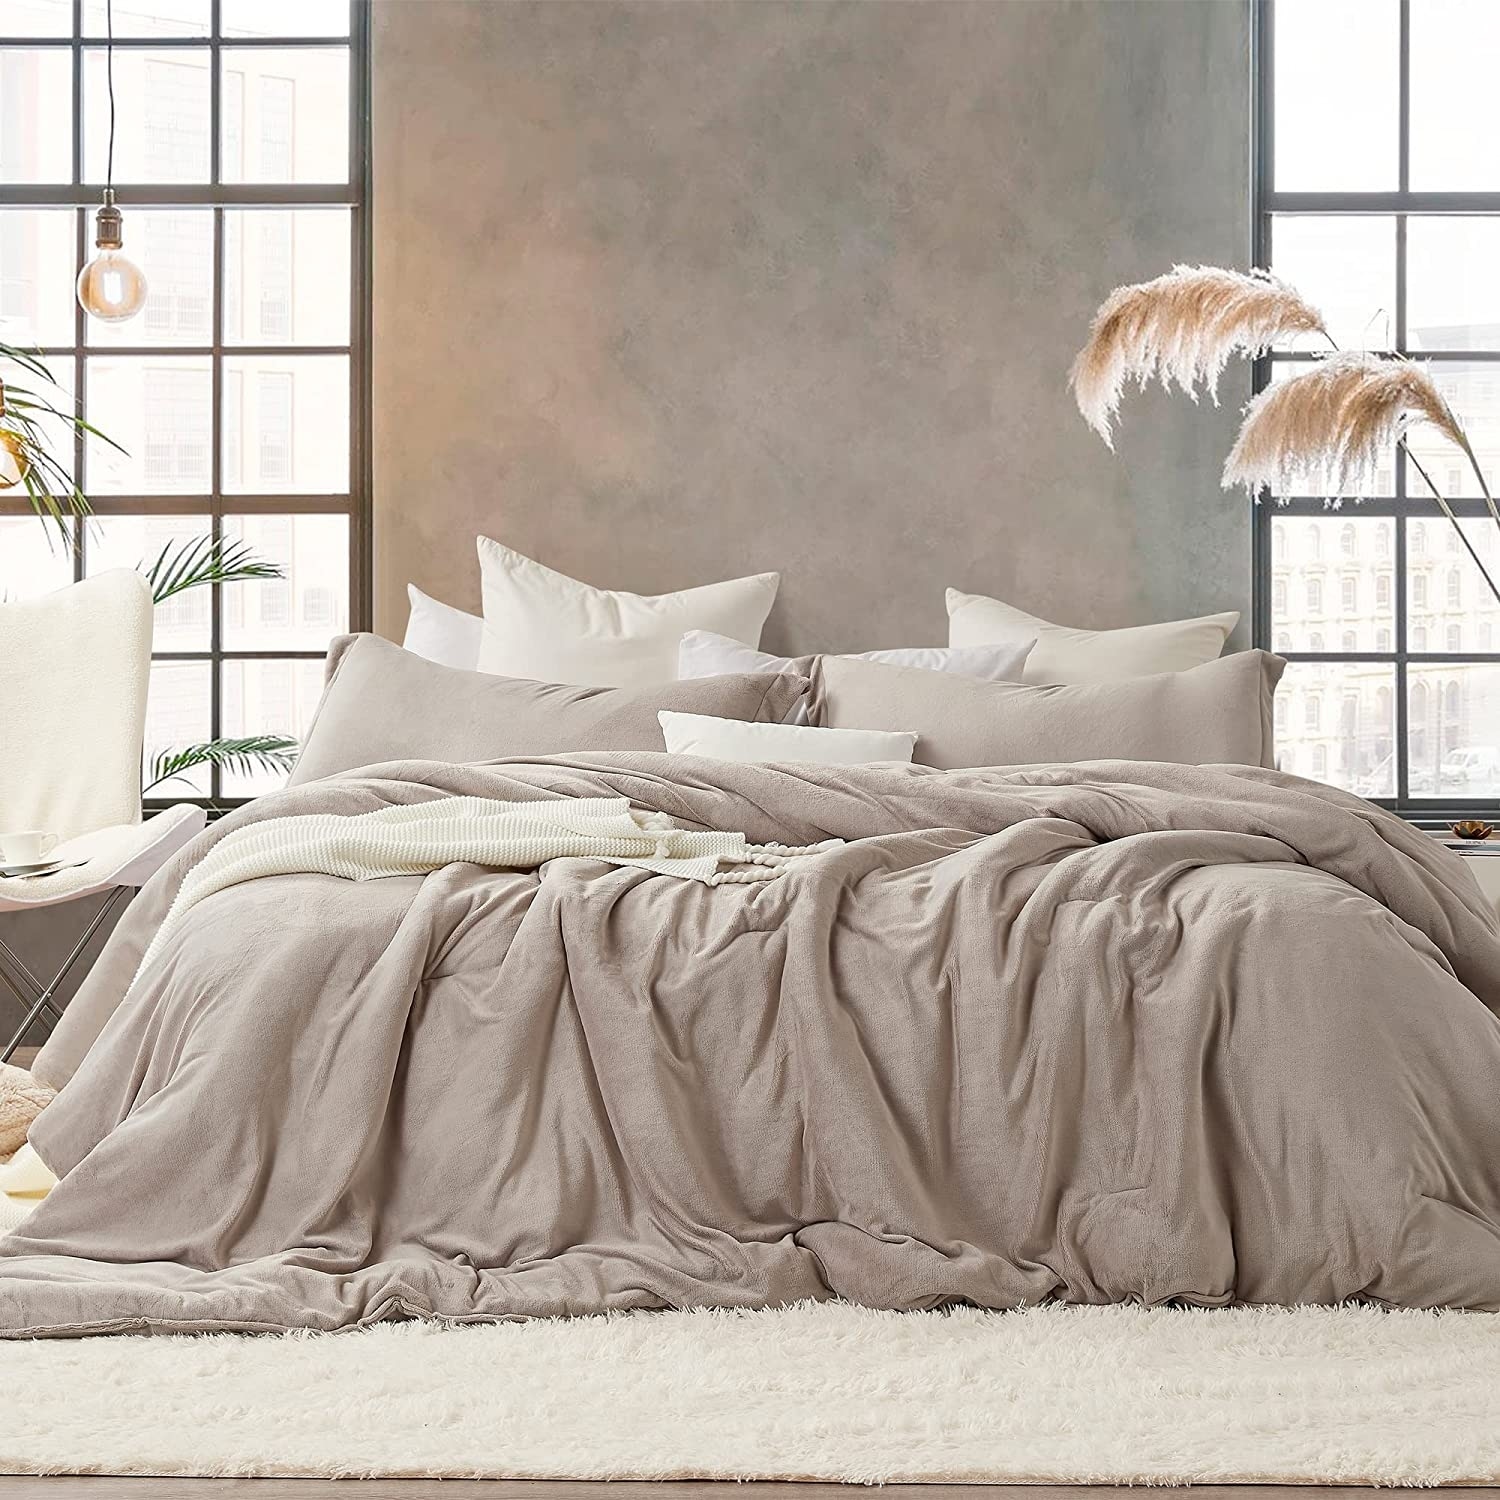 Oversized Comforters by Byourbed, where our Queen is a King Sized Comforter  and our King is an Oversized Comforter for your bedding comfort and decor.  From Comforters and Duvets to Sheet Sets